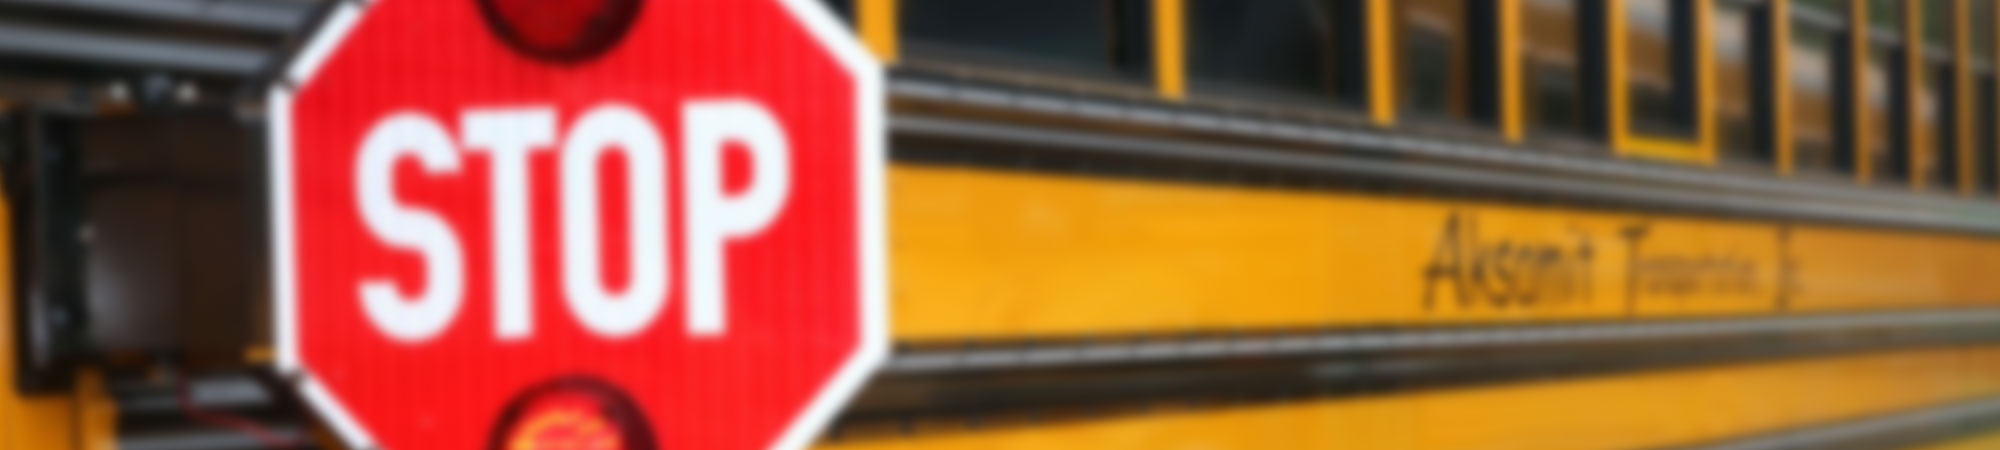 Blurred photo of a yellow school bus with a lighted stop sign on the side